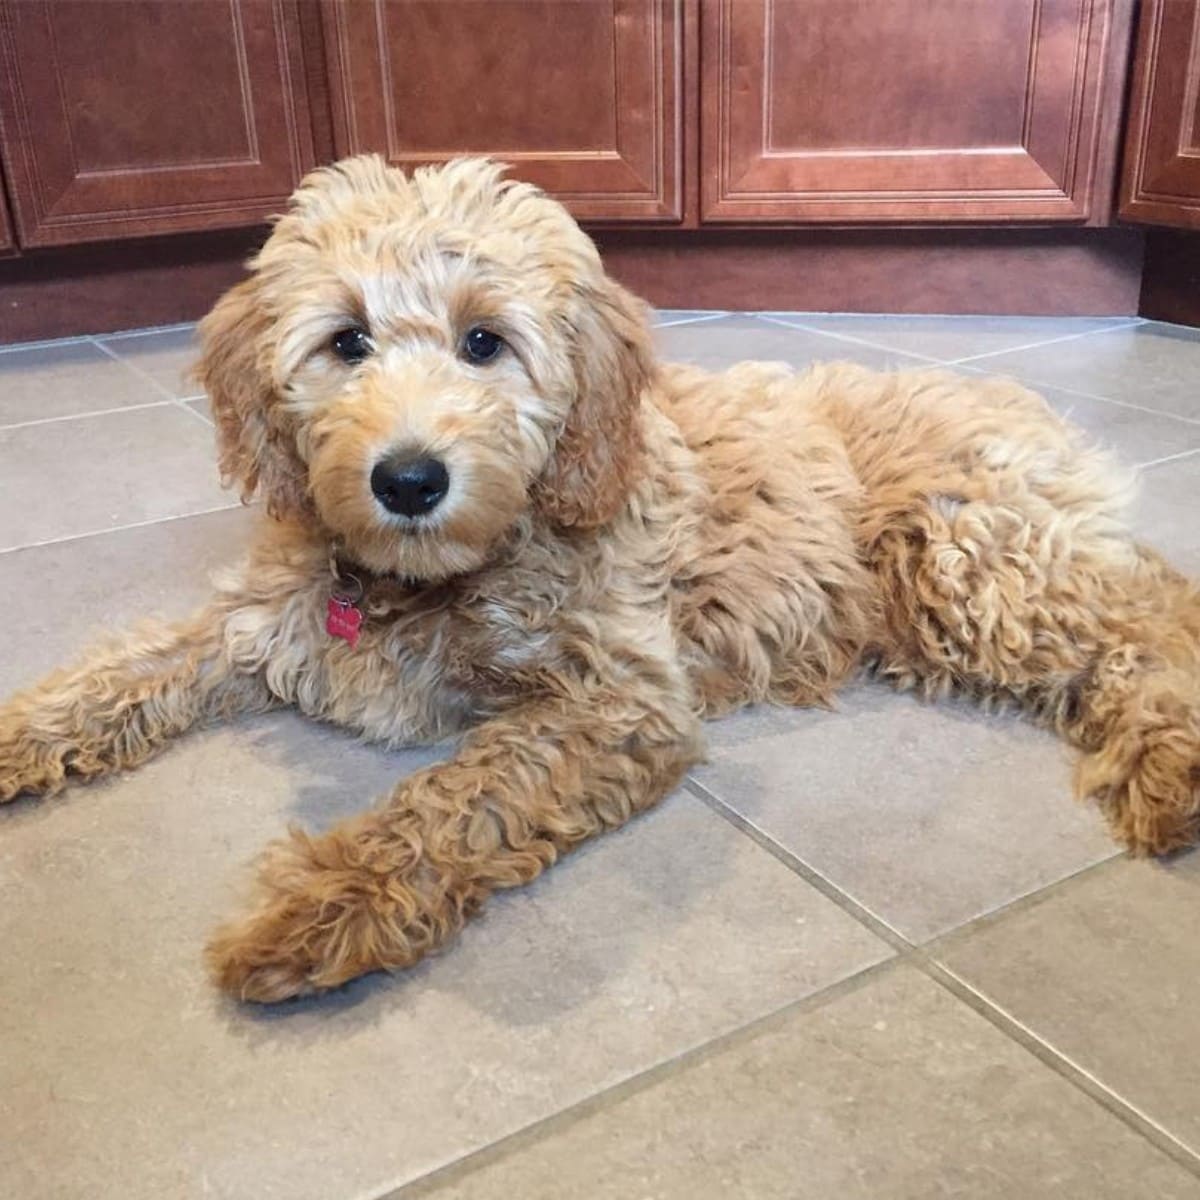 Mini Goldendoodle puppy lying on the floor